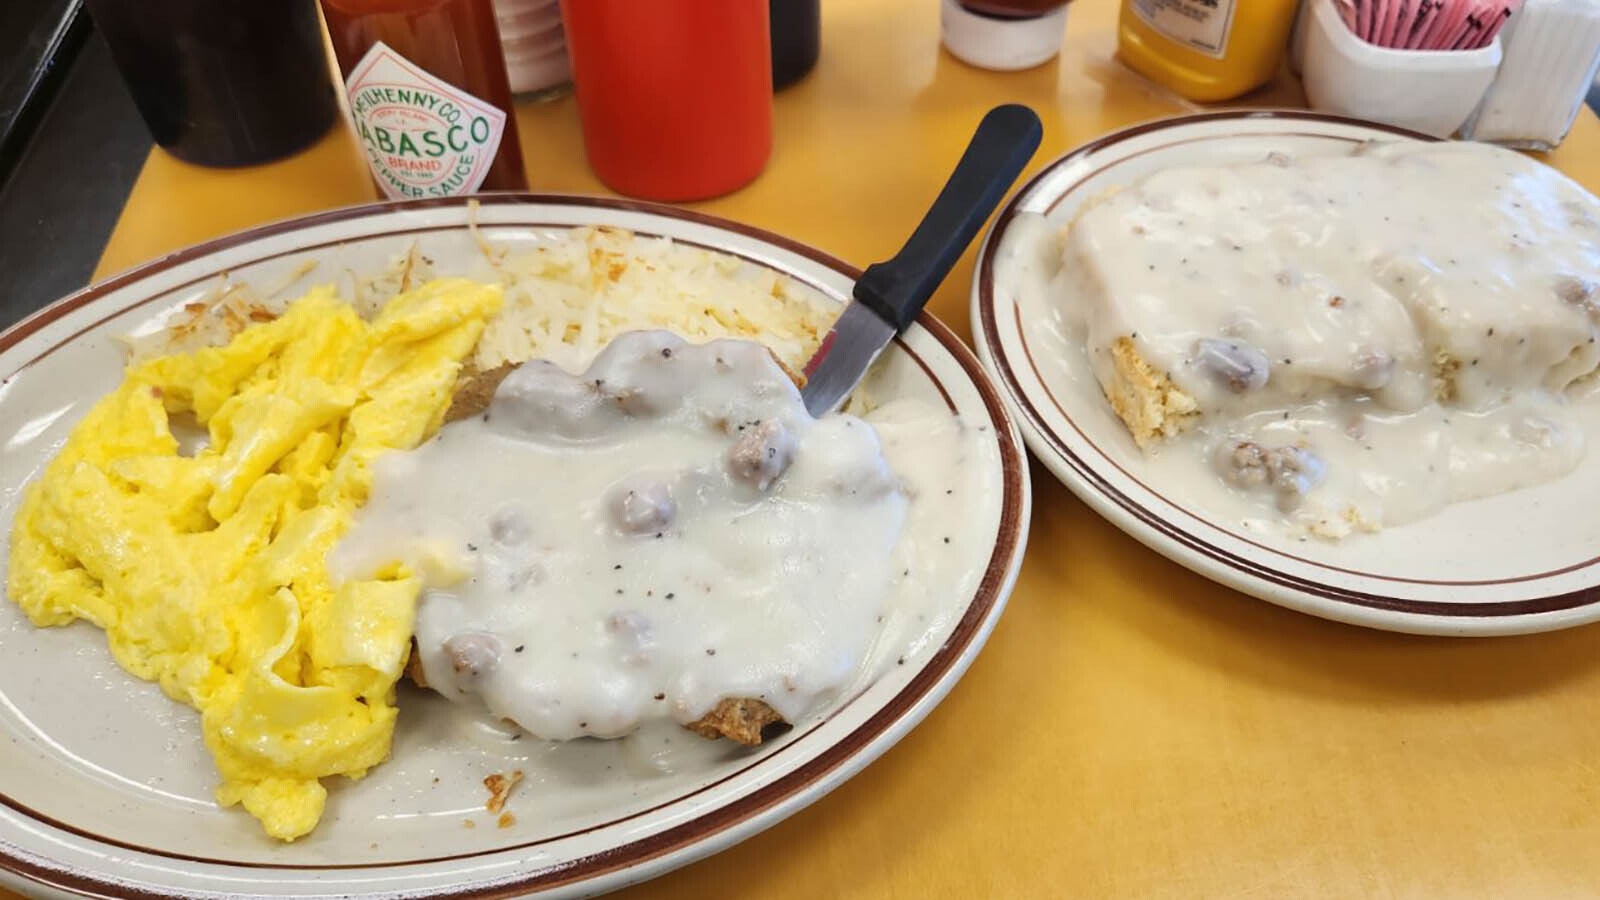 The locals say the chicken-fried steak is always a good choice.